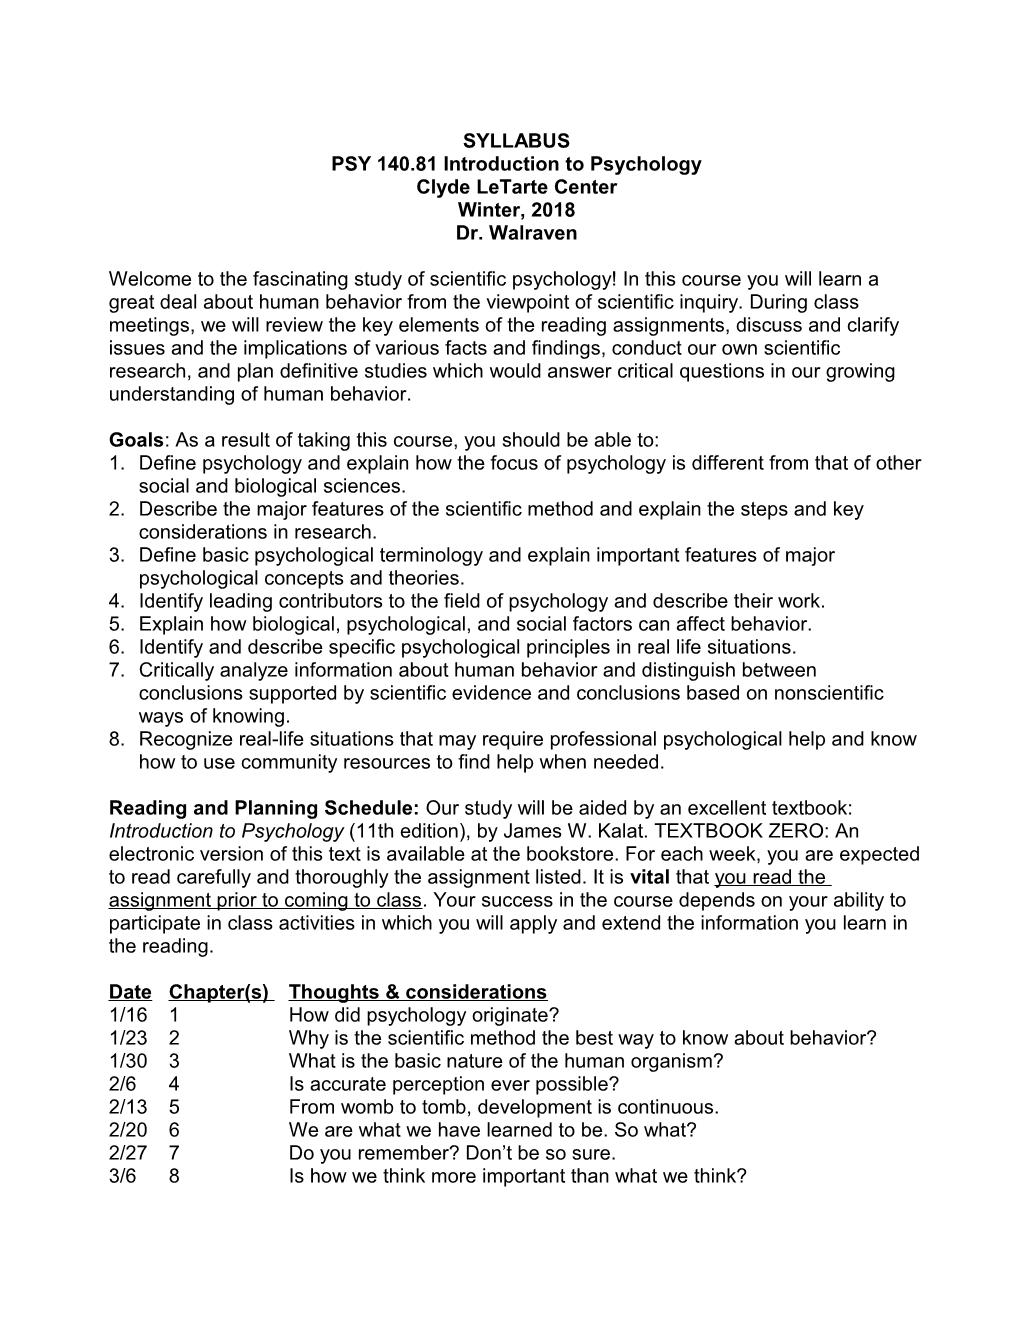 Syllabus for PSY 140 Introduction to Psychology; Winter, 2018; Dr. Walraven